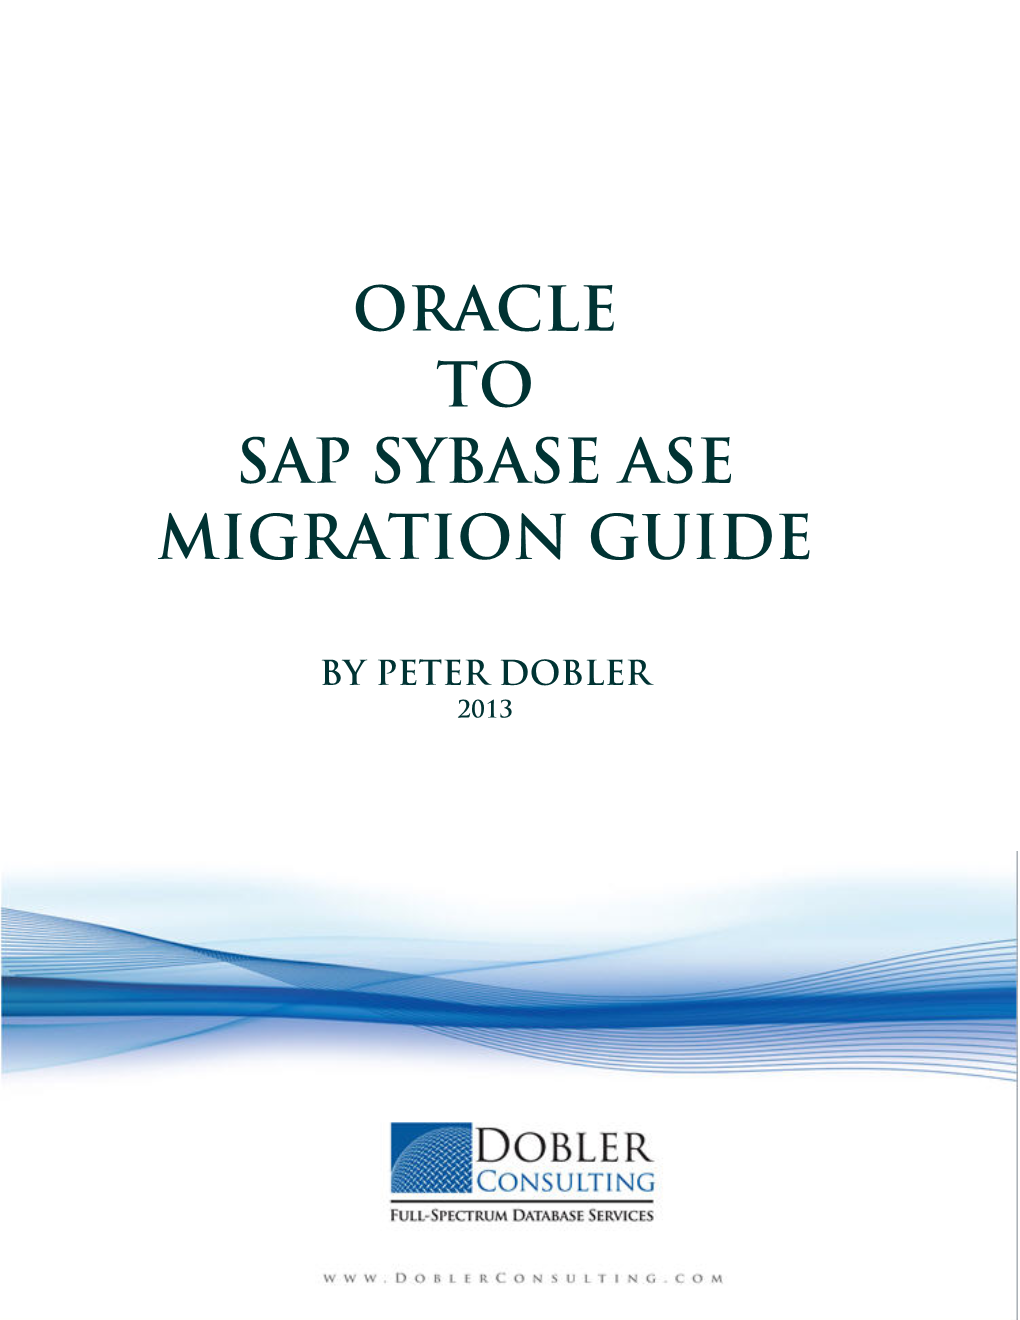 Oracle to Sap Sybase Ase Migration Guide